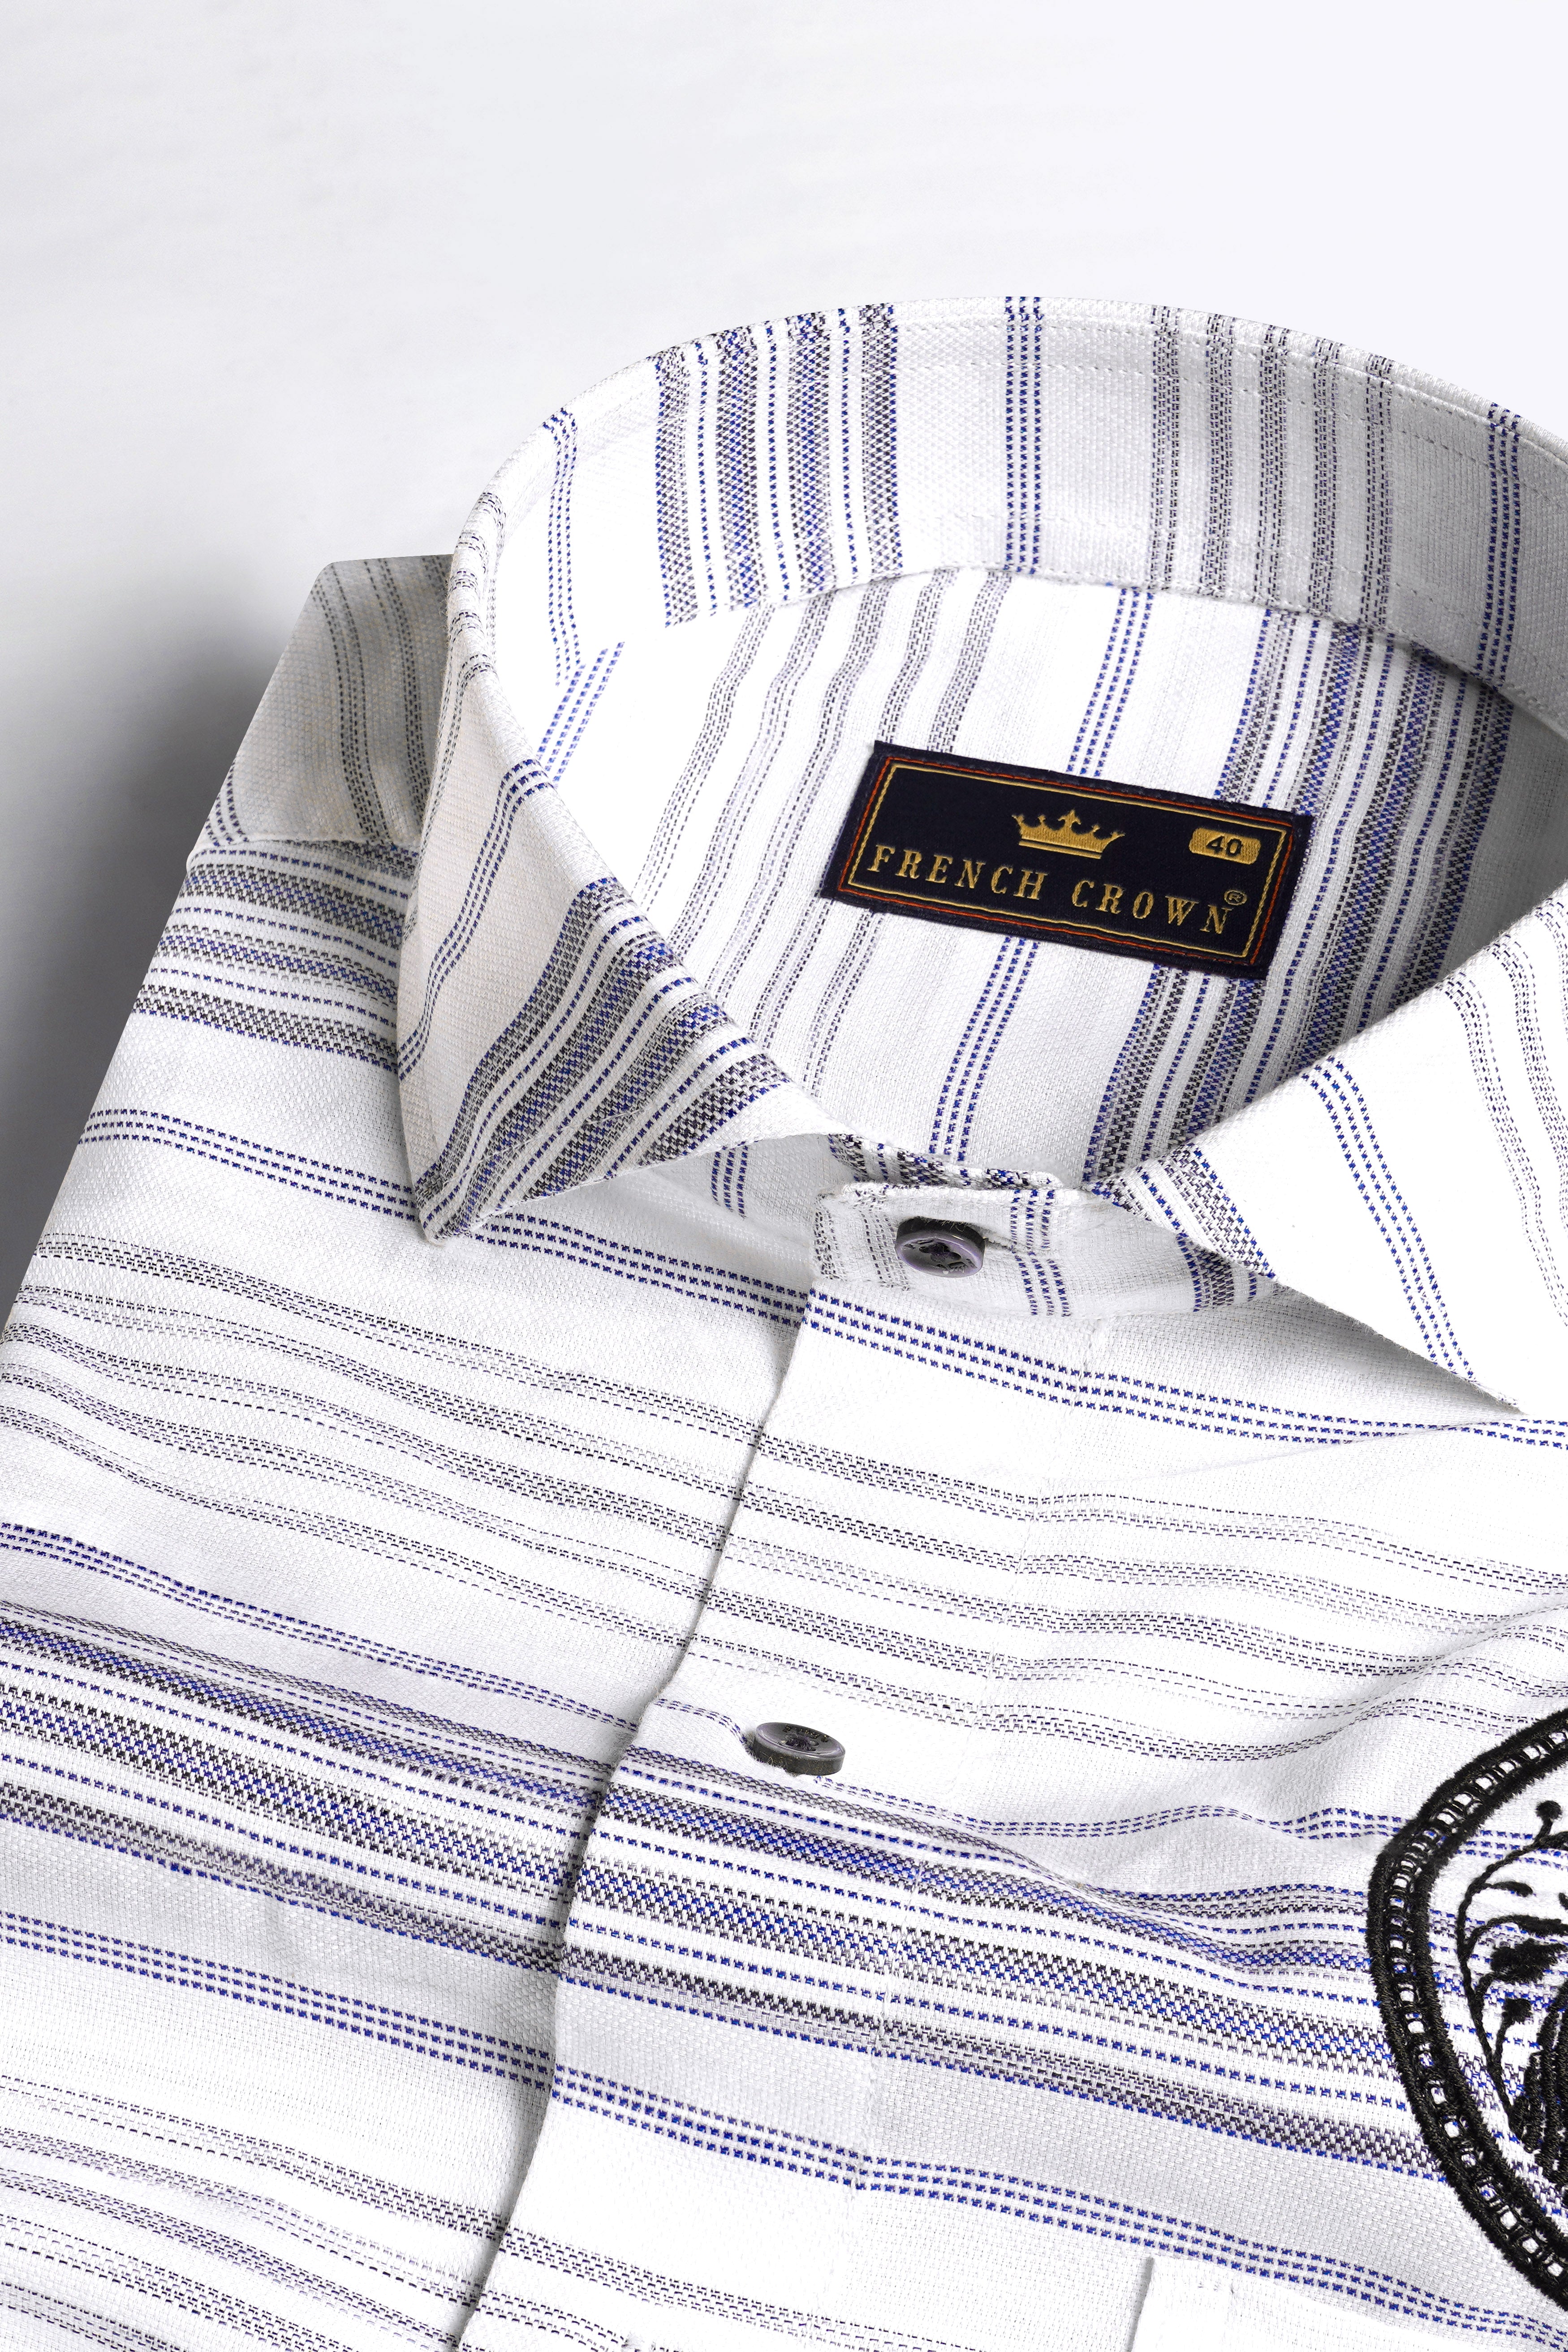 Bright White and Minsk Blue Striped with Horse Embroidered Dobby Premium Giza Cotton Designer Shirt 6198-CA-BLE-E192-38, 6198-CA-BLE-E192-H-38, 6198-CA-BLE-E192-39, 6198-CA-BLE-E192-H-39, 6198-CA-BLE-E192-40, 6198-CA-BLE-E192-H-40, 6198-CA-BLE-E192-42, 6198-CA-BLE-E192-H-42, 6198-CA-BLE-E192-44, 6198-CA-BLE-E192-H-44, 6198-CA-BLE-E192-46, 6198-CA-BLE-E192-H-46, 6198-CA-BLE-E192-48, 6198-CA-BLE-E192-H-48, 6198-CA-BLE-E192-50, 6198-CA-BLE-E192-H-50, 6198-CA-BLE-E192-52, 6198-CA-BLE-E192-H-52